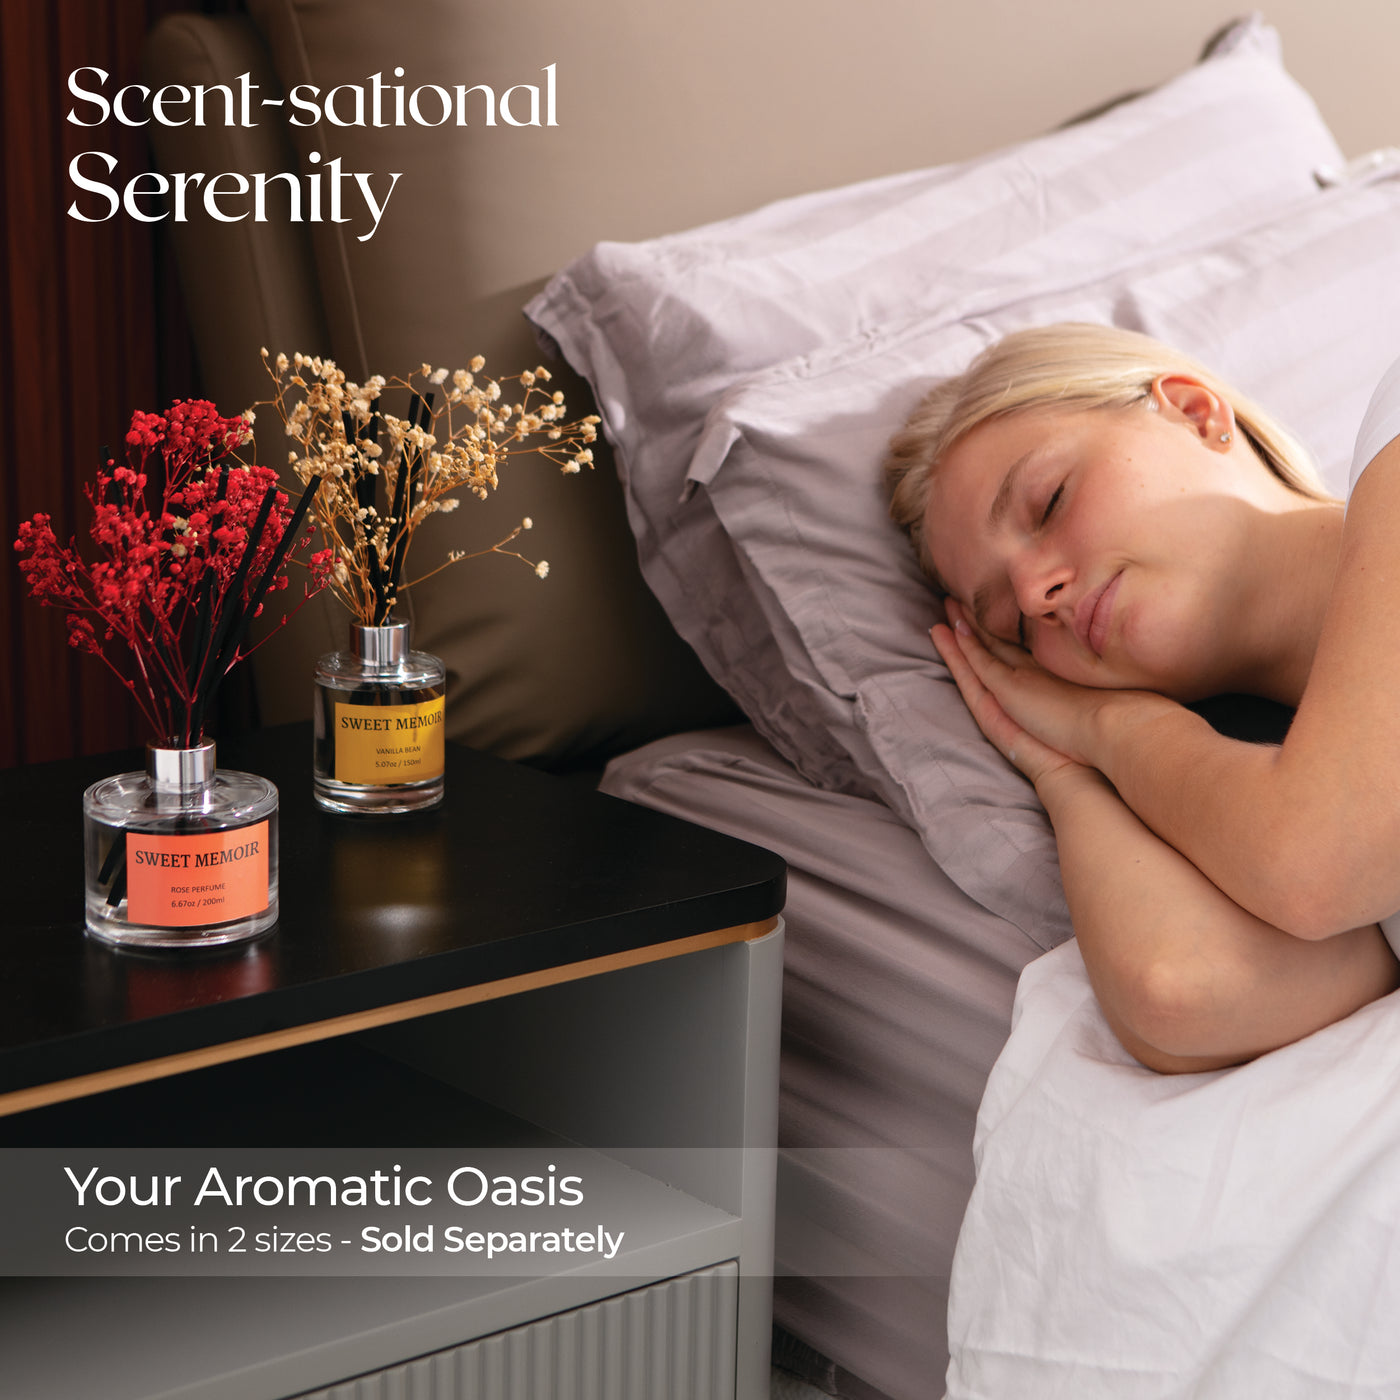 Woman peacefully sleeping with Sweet Memoir reed diffuser on the nightstand, offering a soothing scent for relaxation.